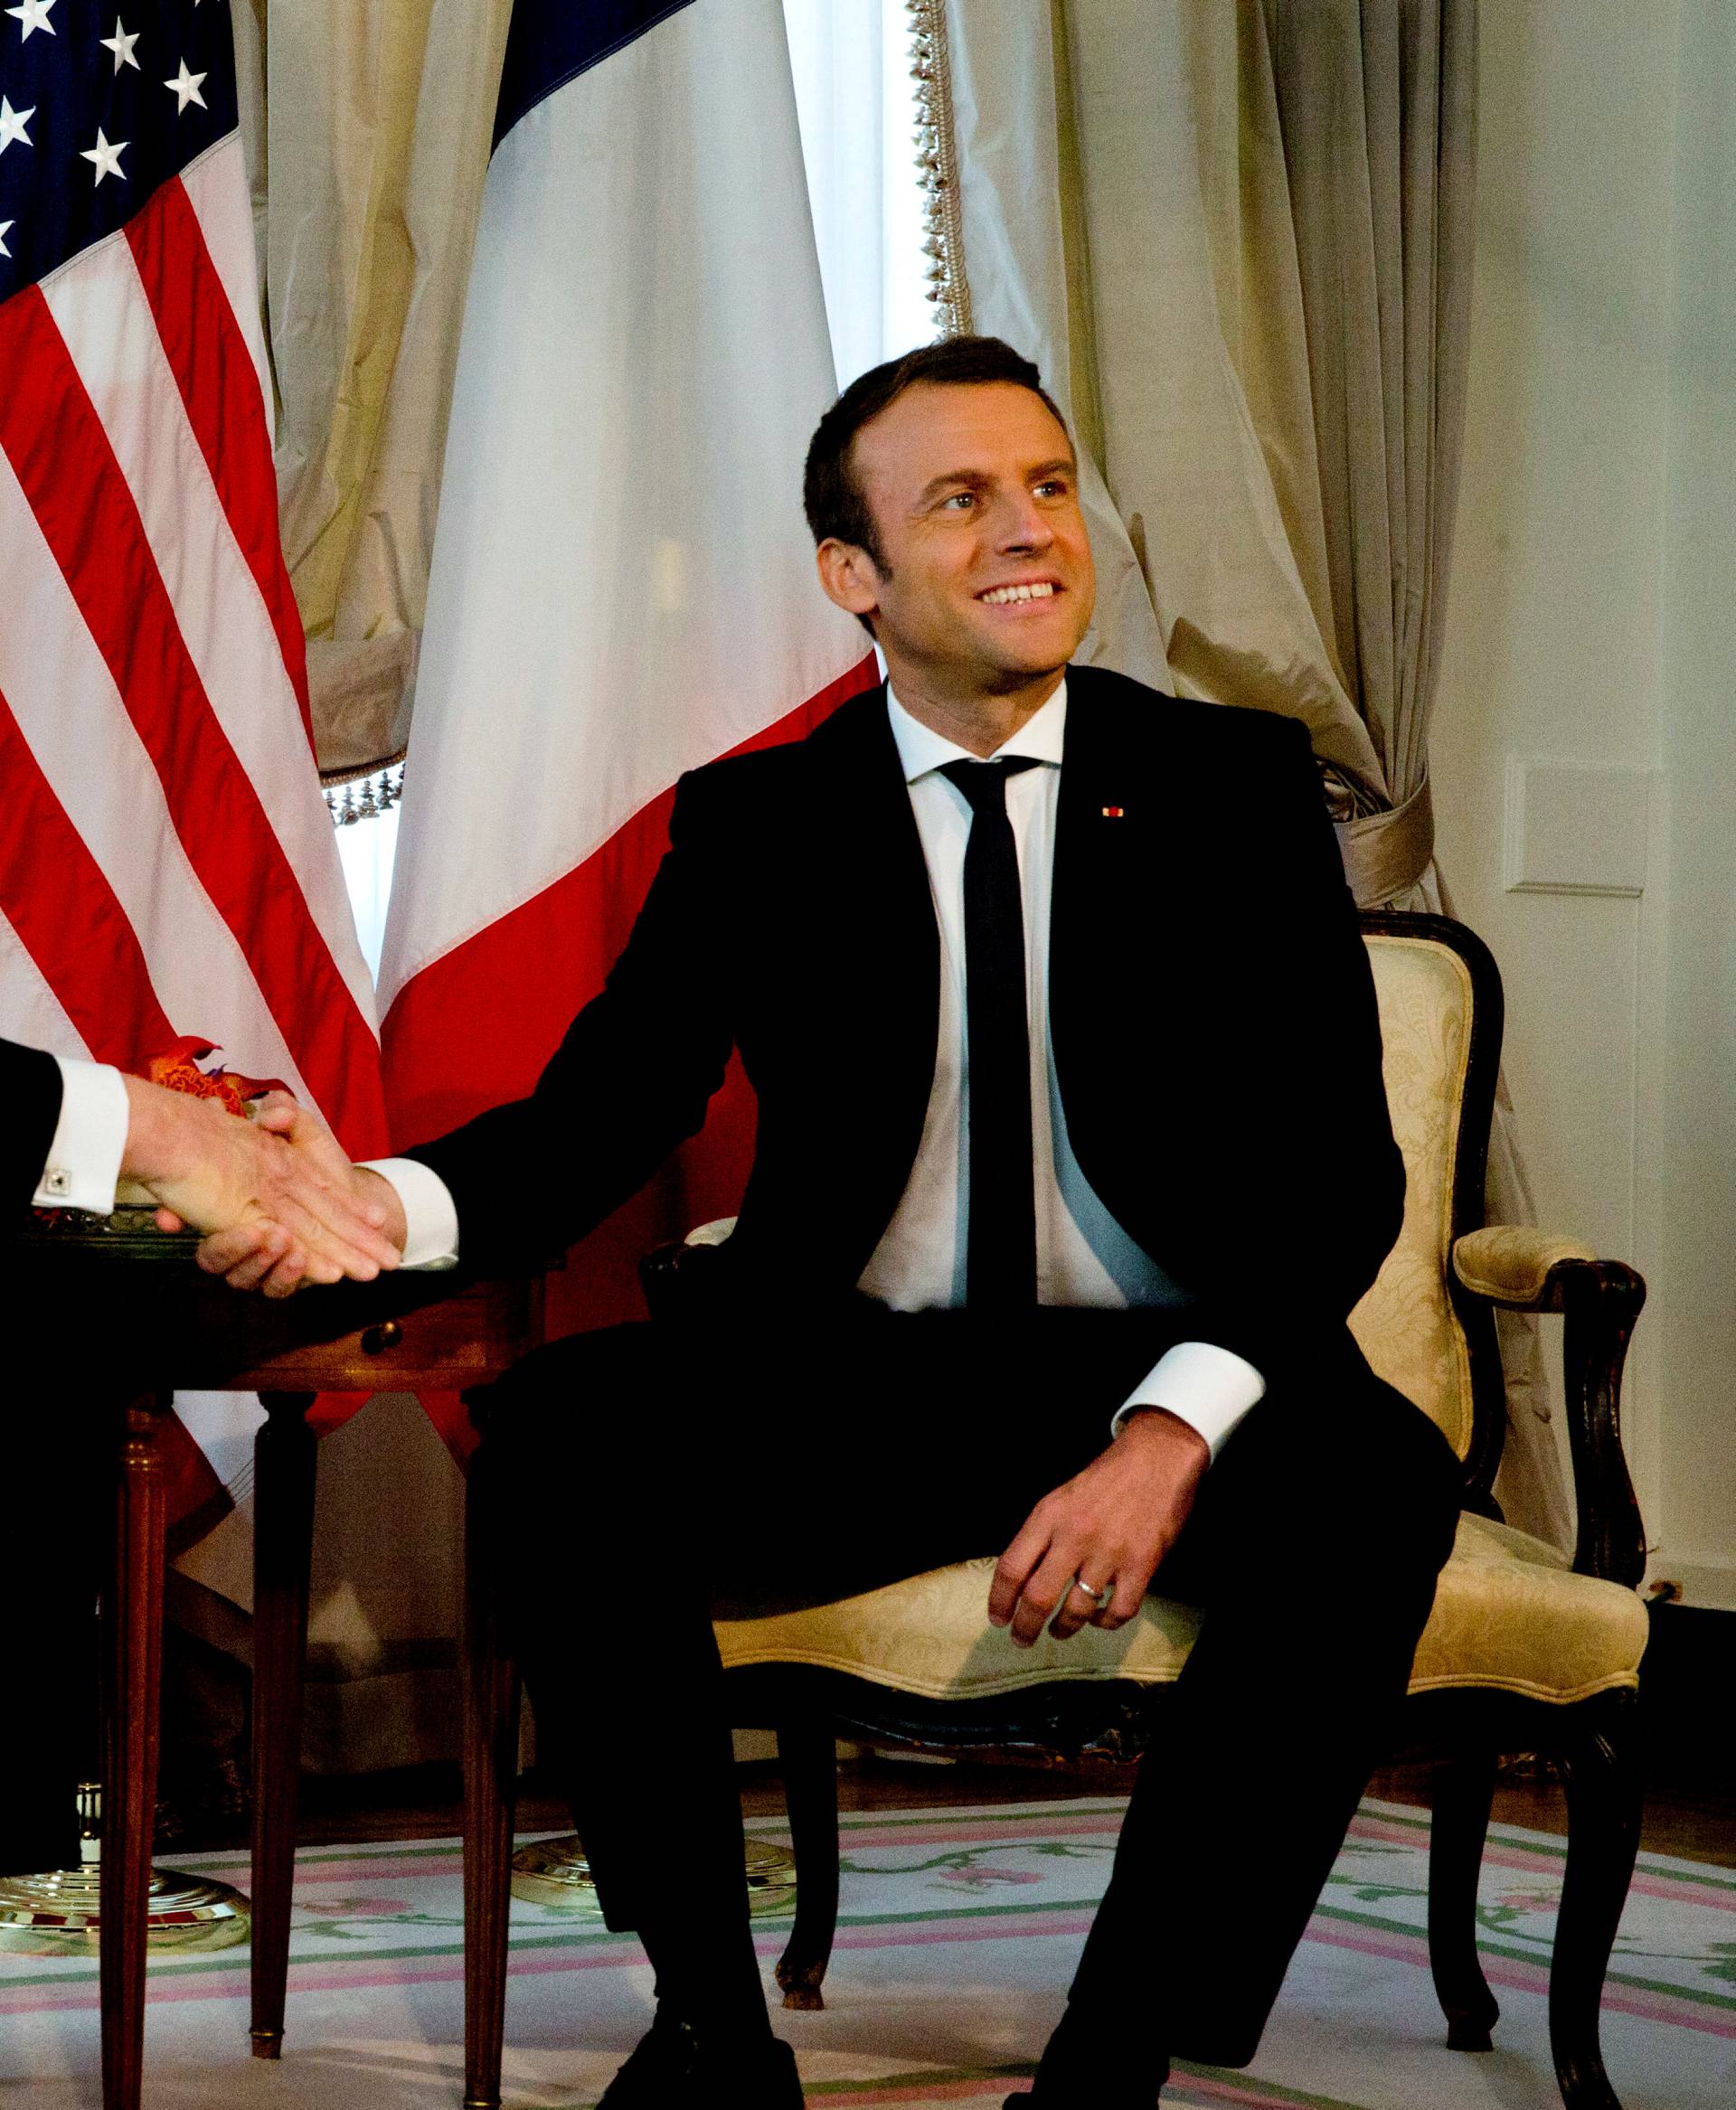 U.S. President Donald Trump meets French President Emmanuel Macron before a working lunch ahead of a NATO Summit in Brussels